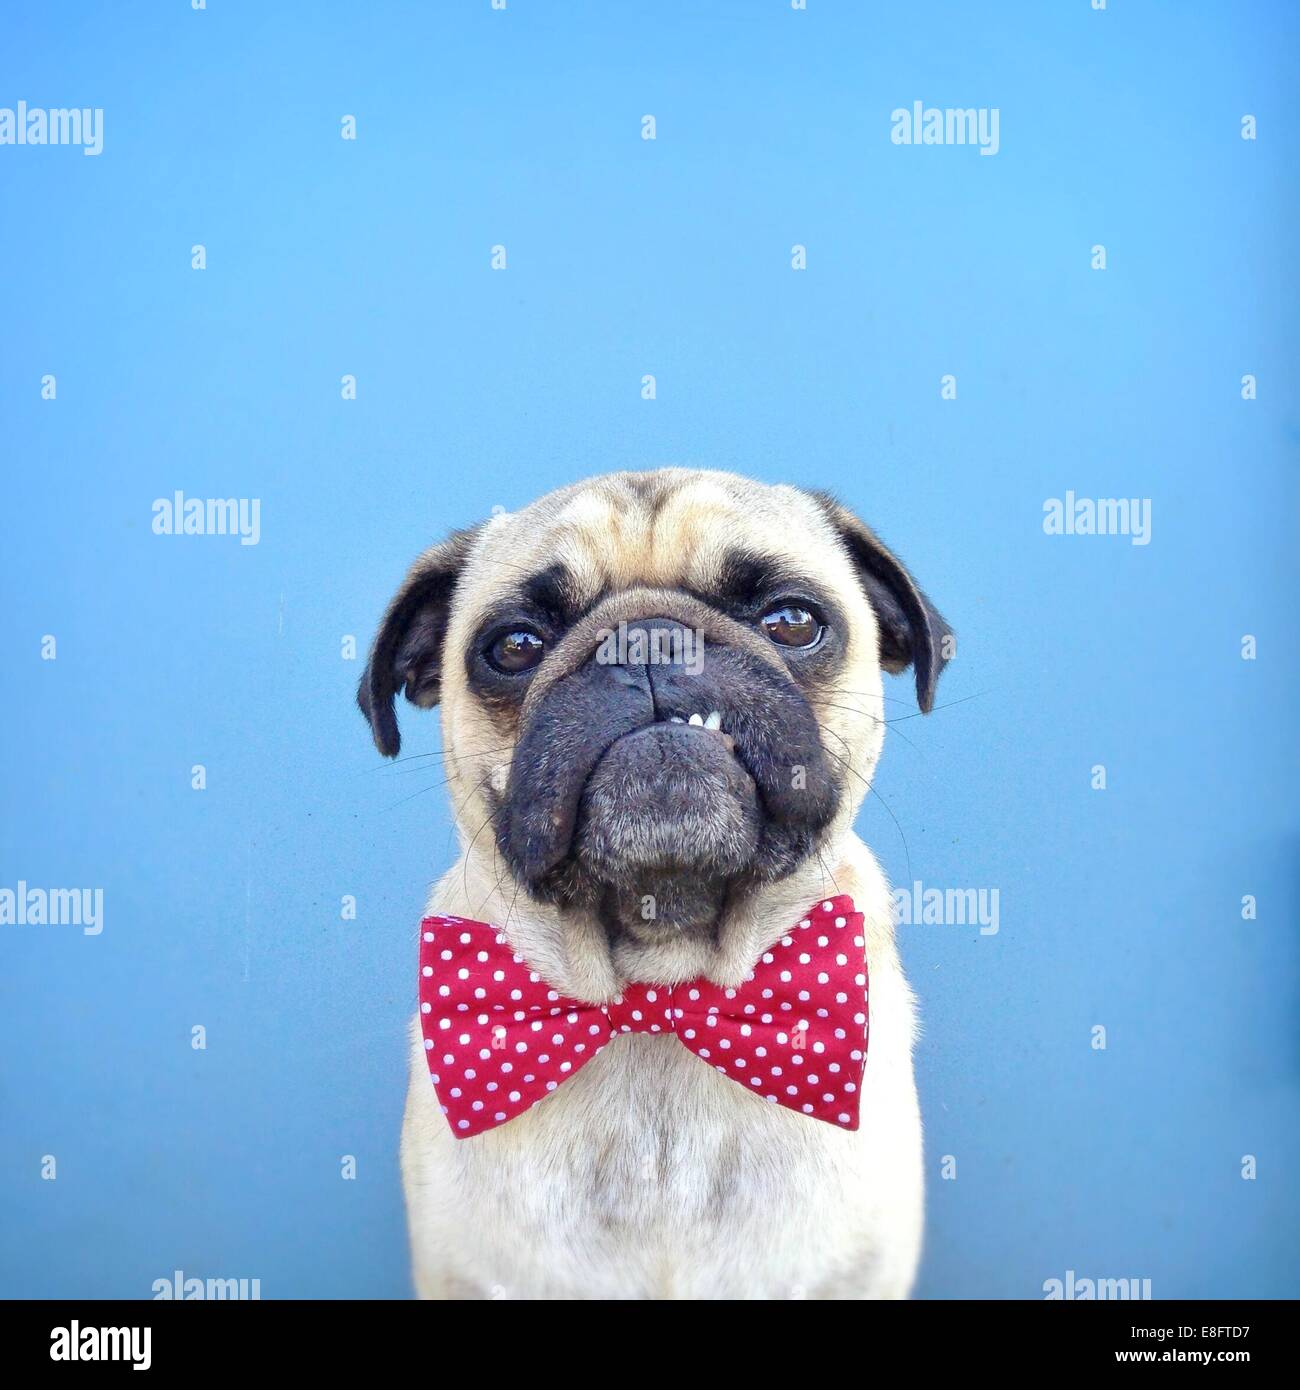 Portrait of a Pug dog with attitude wearing bow tie Stock Photo